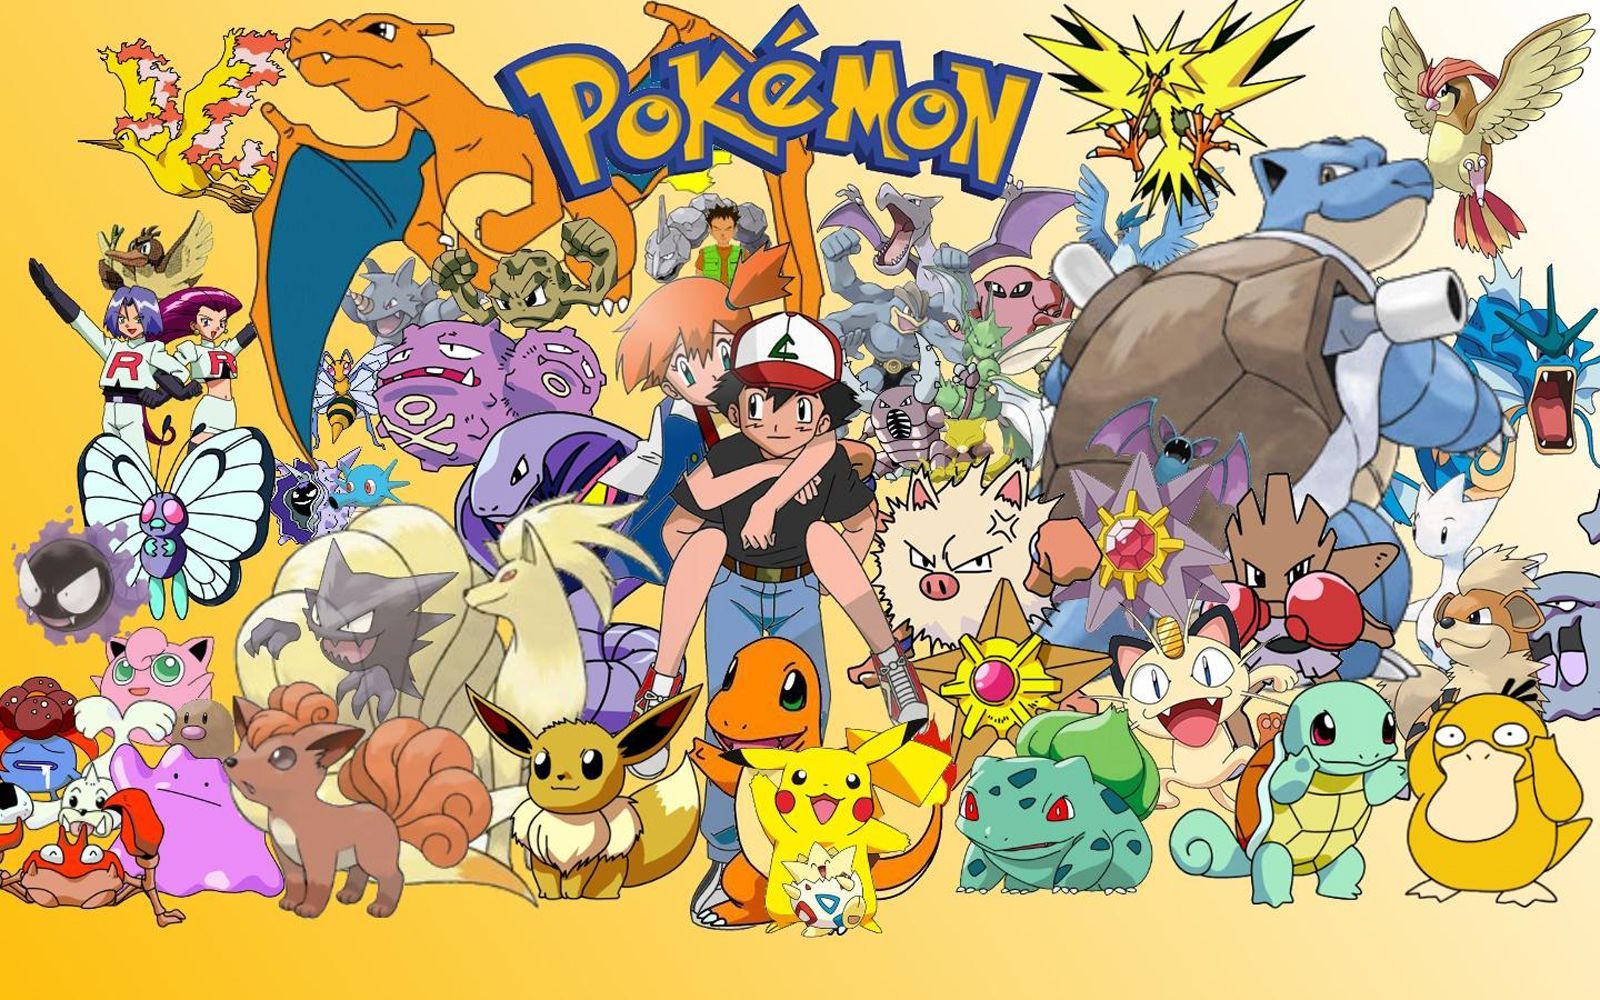 Pokémon for Android APK Download (Full Game)